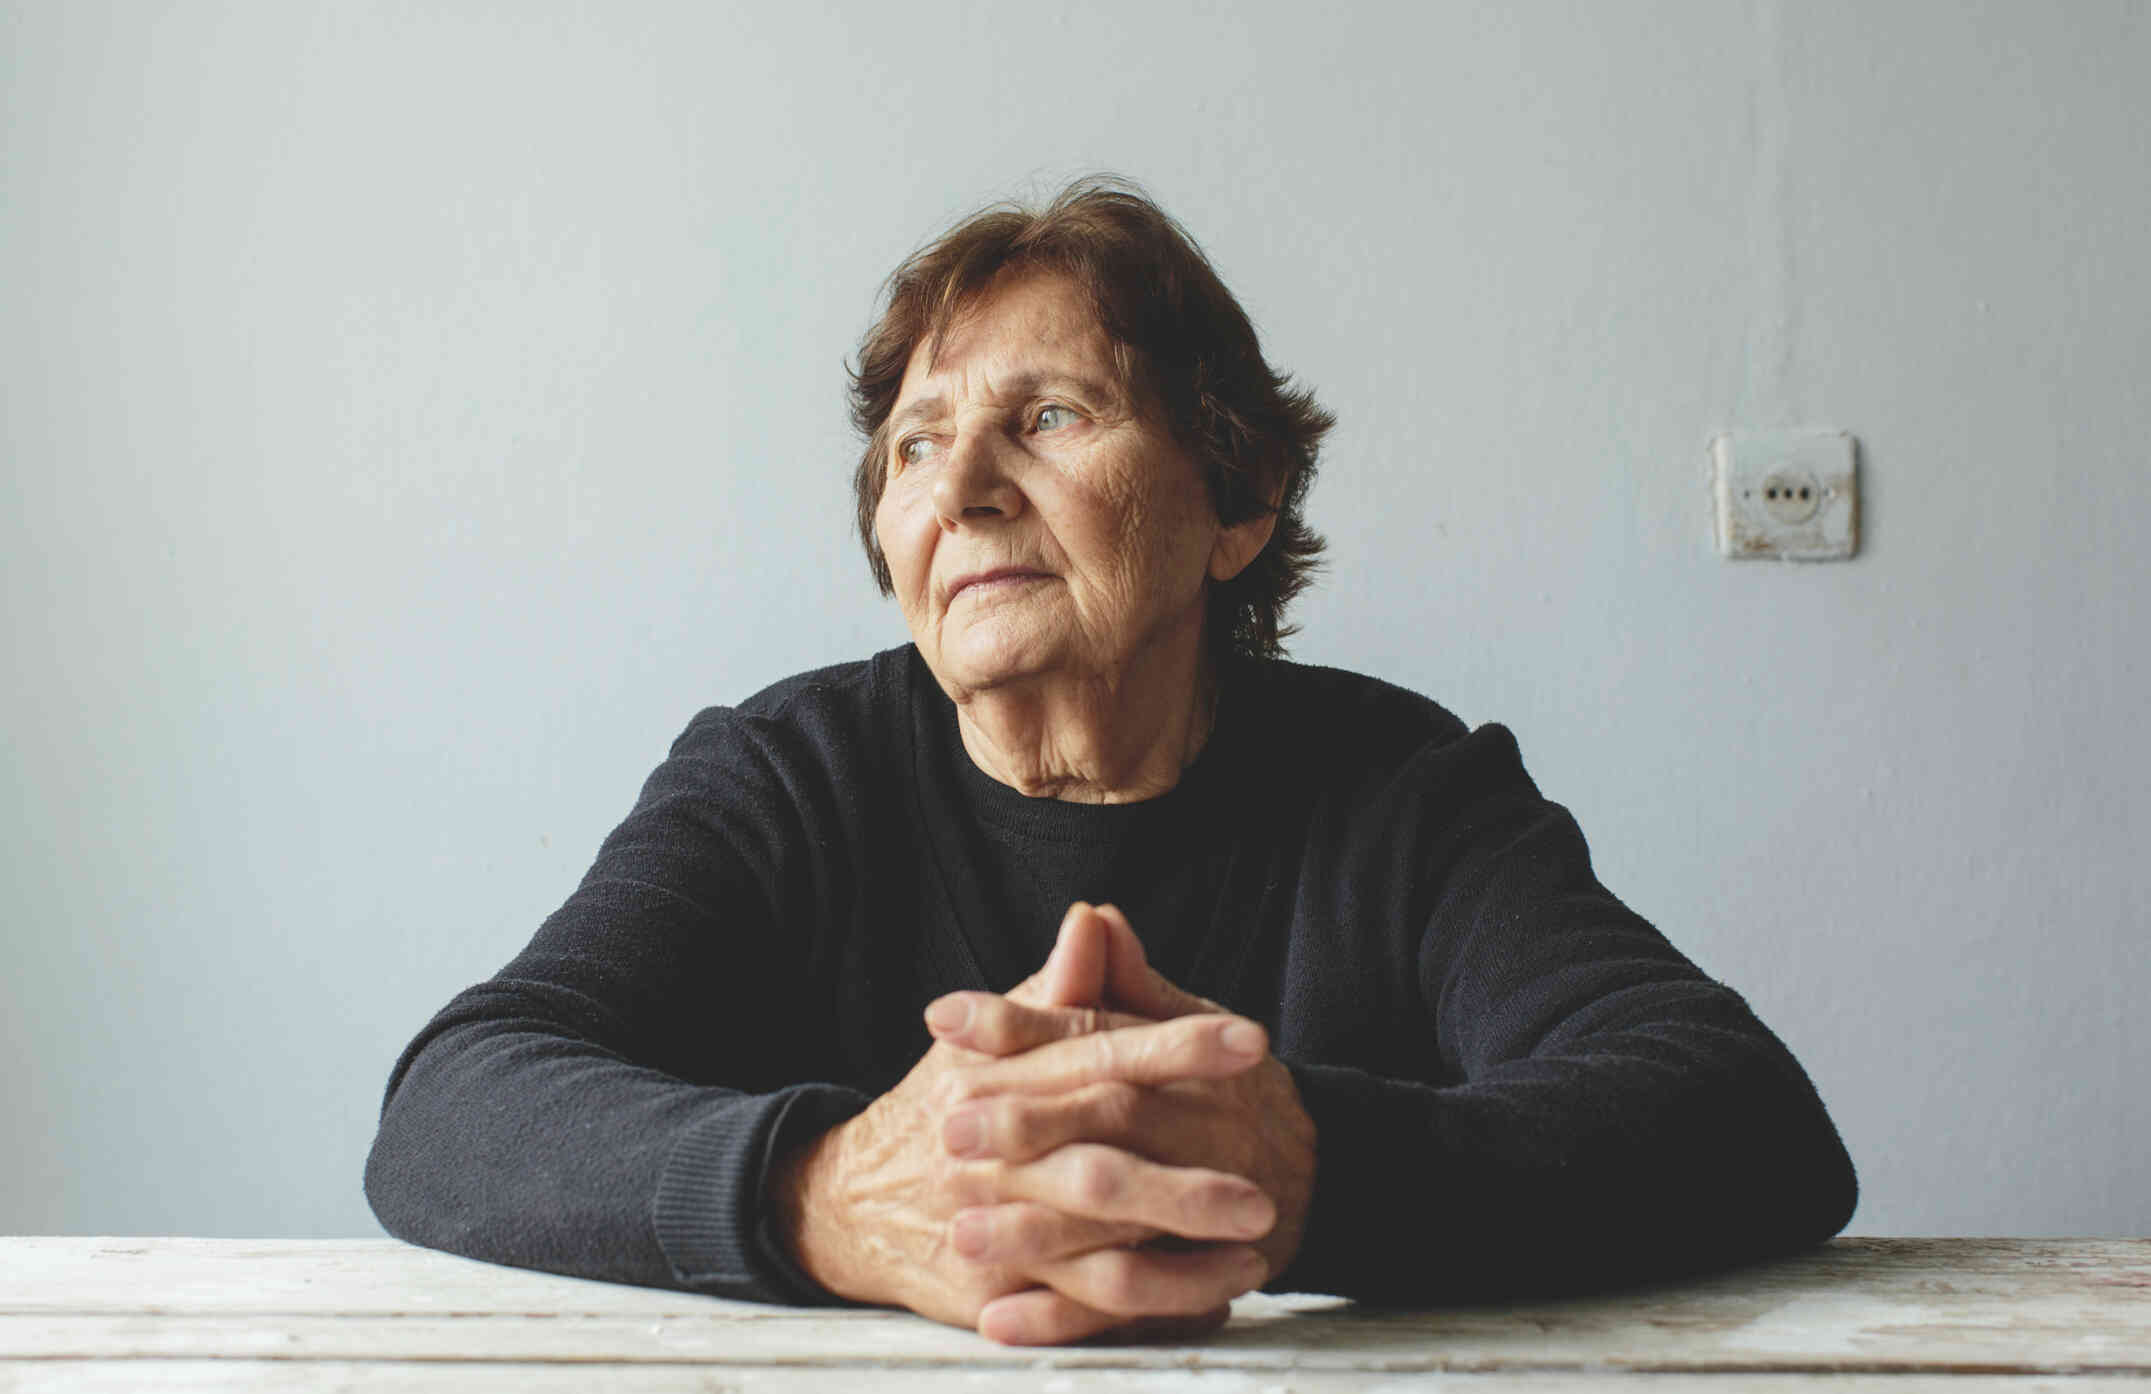 A mature woman in a black shirt sits at a table with her hands pressed together as she gazes off sadly.